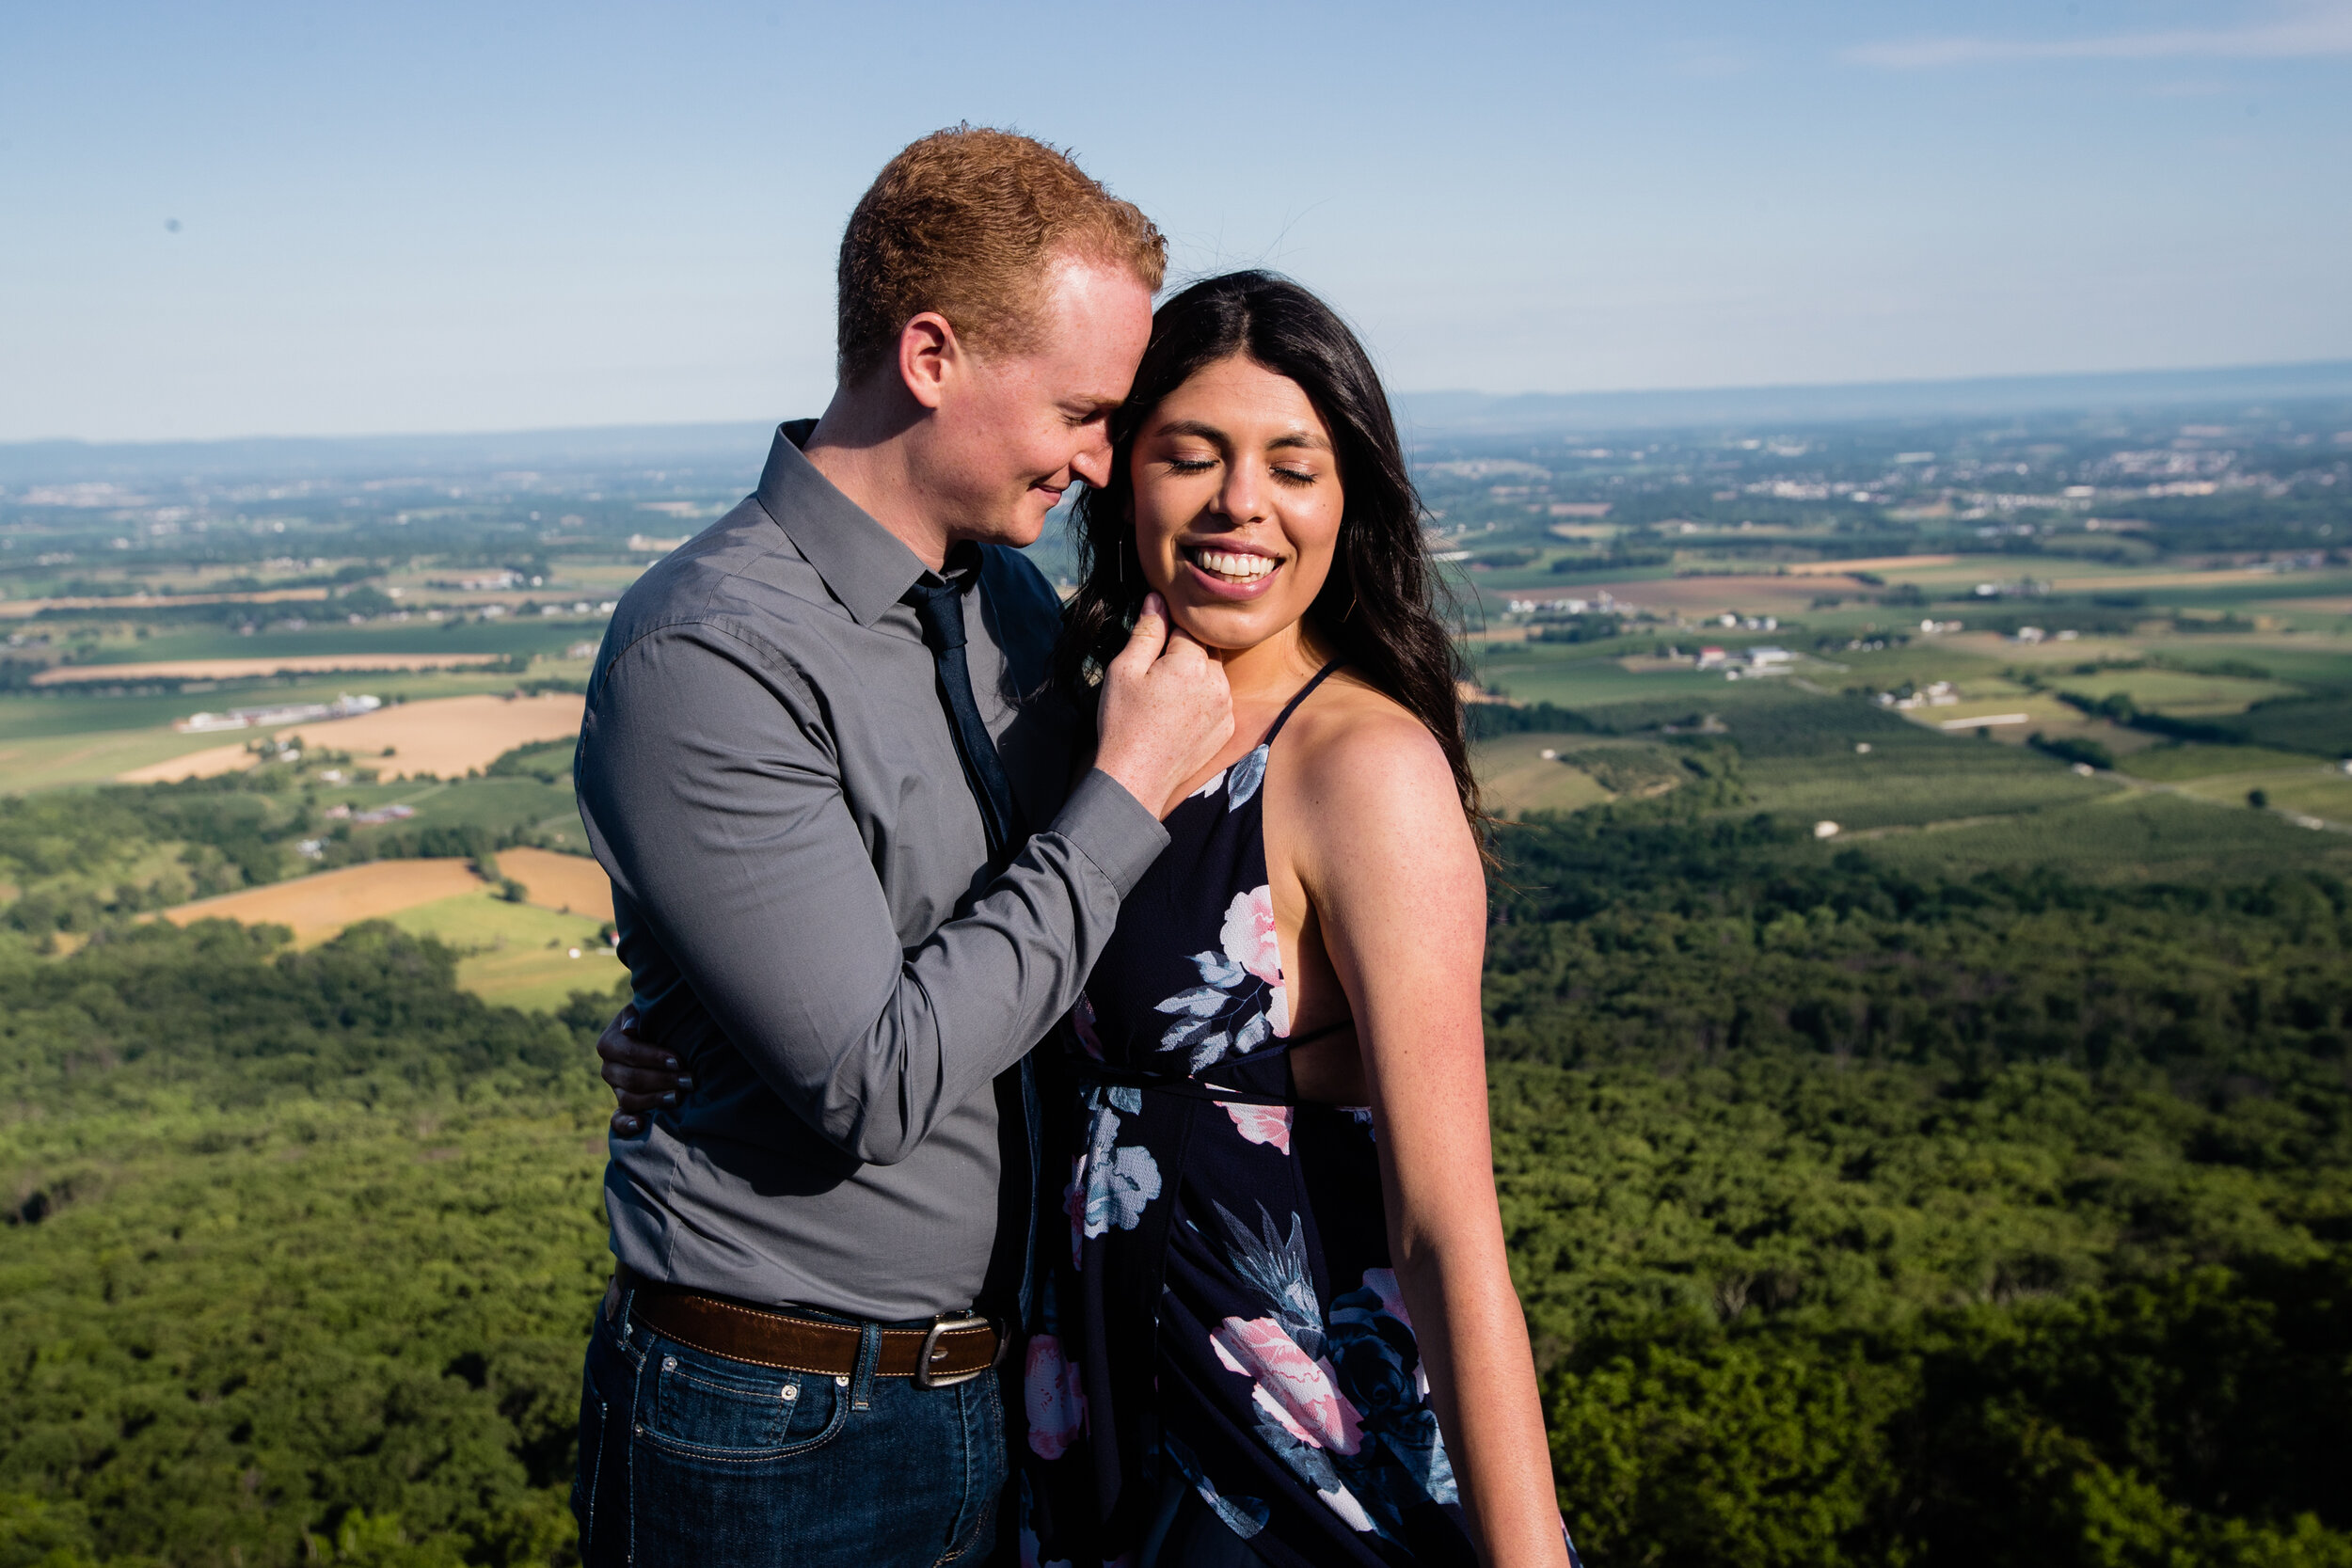 Engagement Session at High Rock Mountain in Western Maryland by Megapixels Media Photography best husband and wife wedding photographers-4.jpg